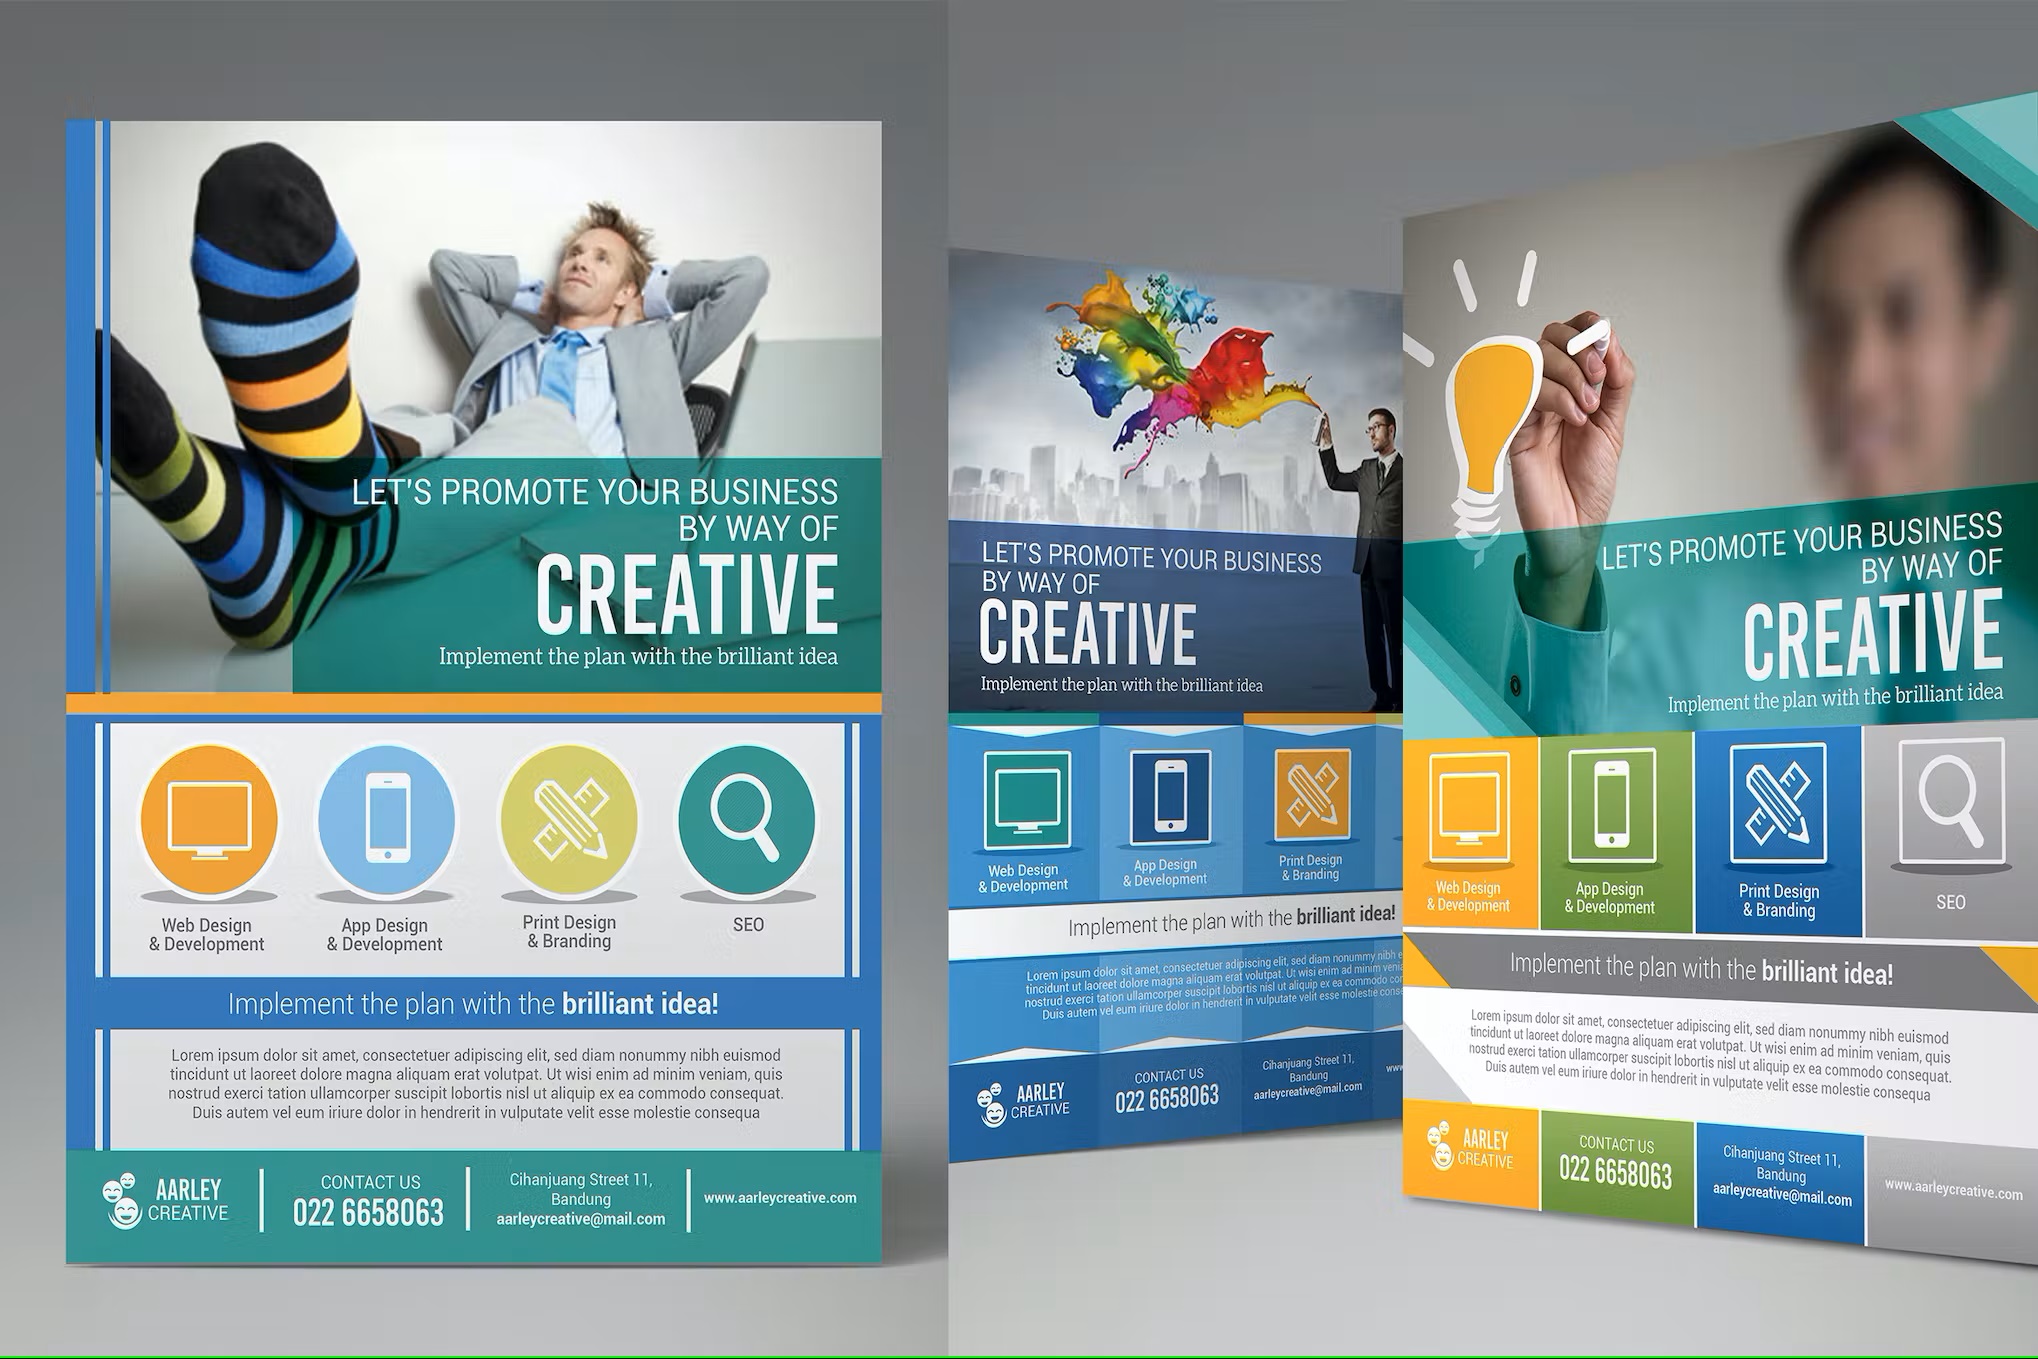 Image showing various samples of digital marketing work and pull-up banners as examples of creative agency work at SmartCuts Creative in Lausanne and Geneva